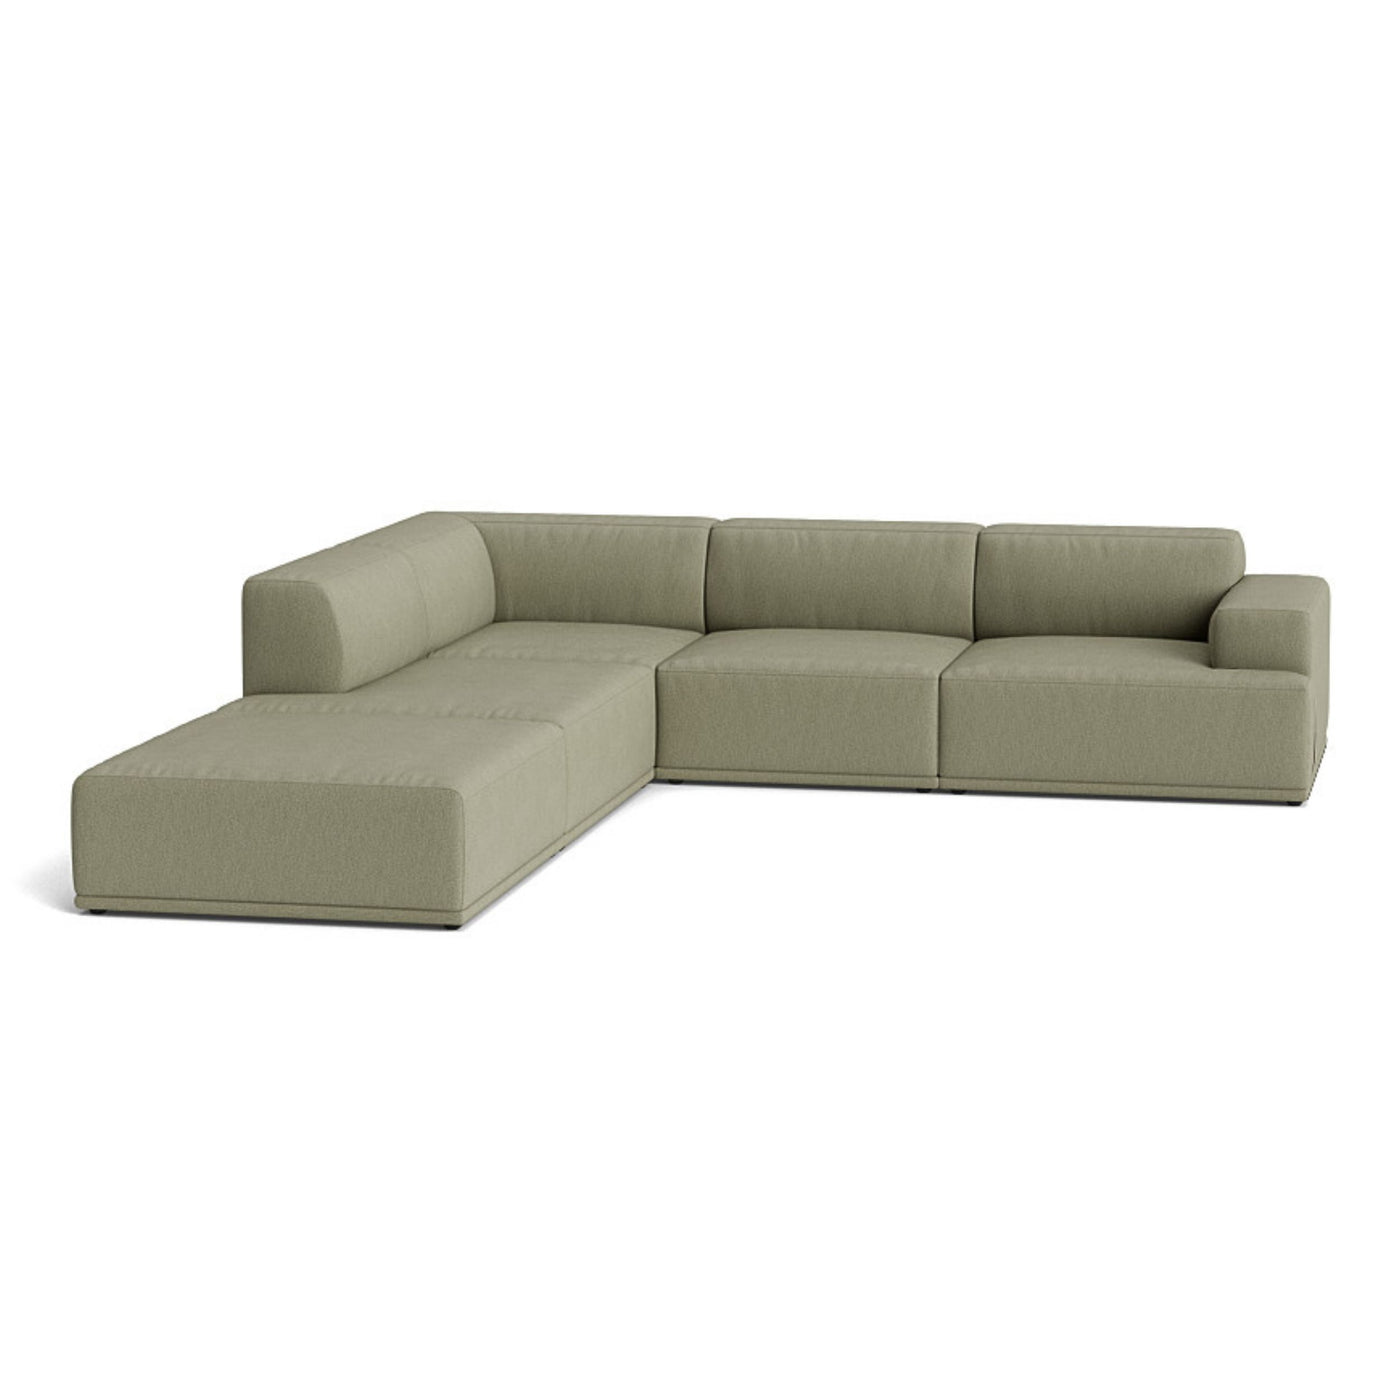 Muuto Connect Soft Modular Corner Sofa, configuration 1. Made-to-order from someday designs. #colour_clay-15